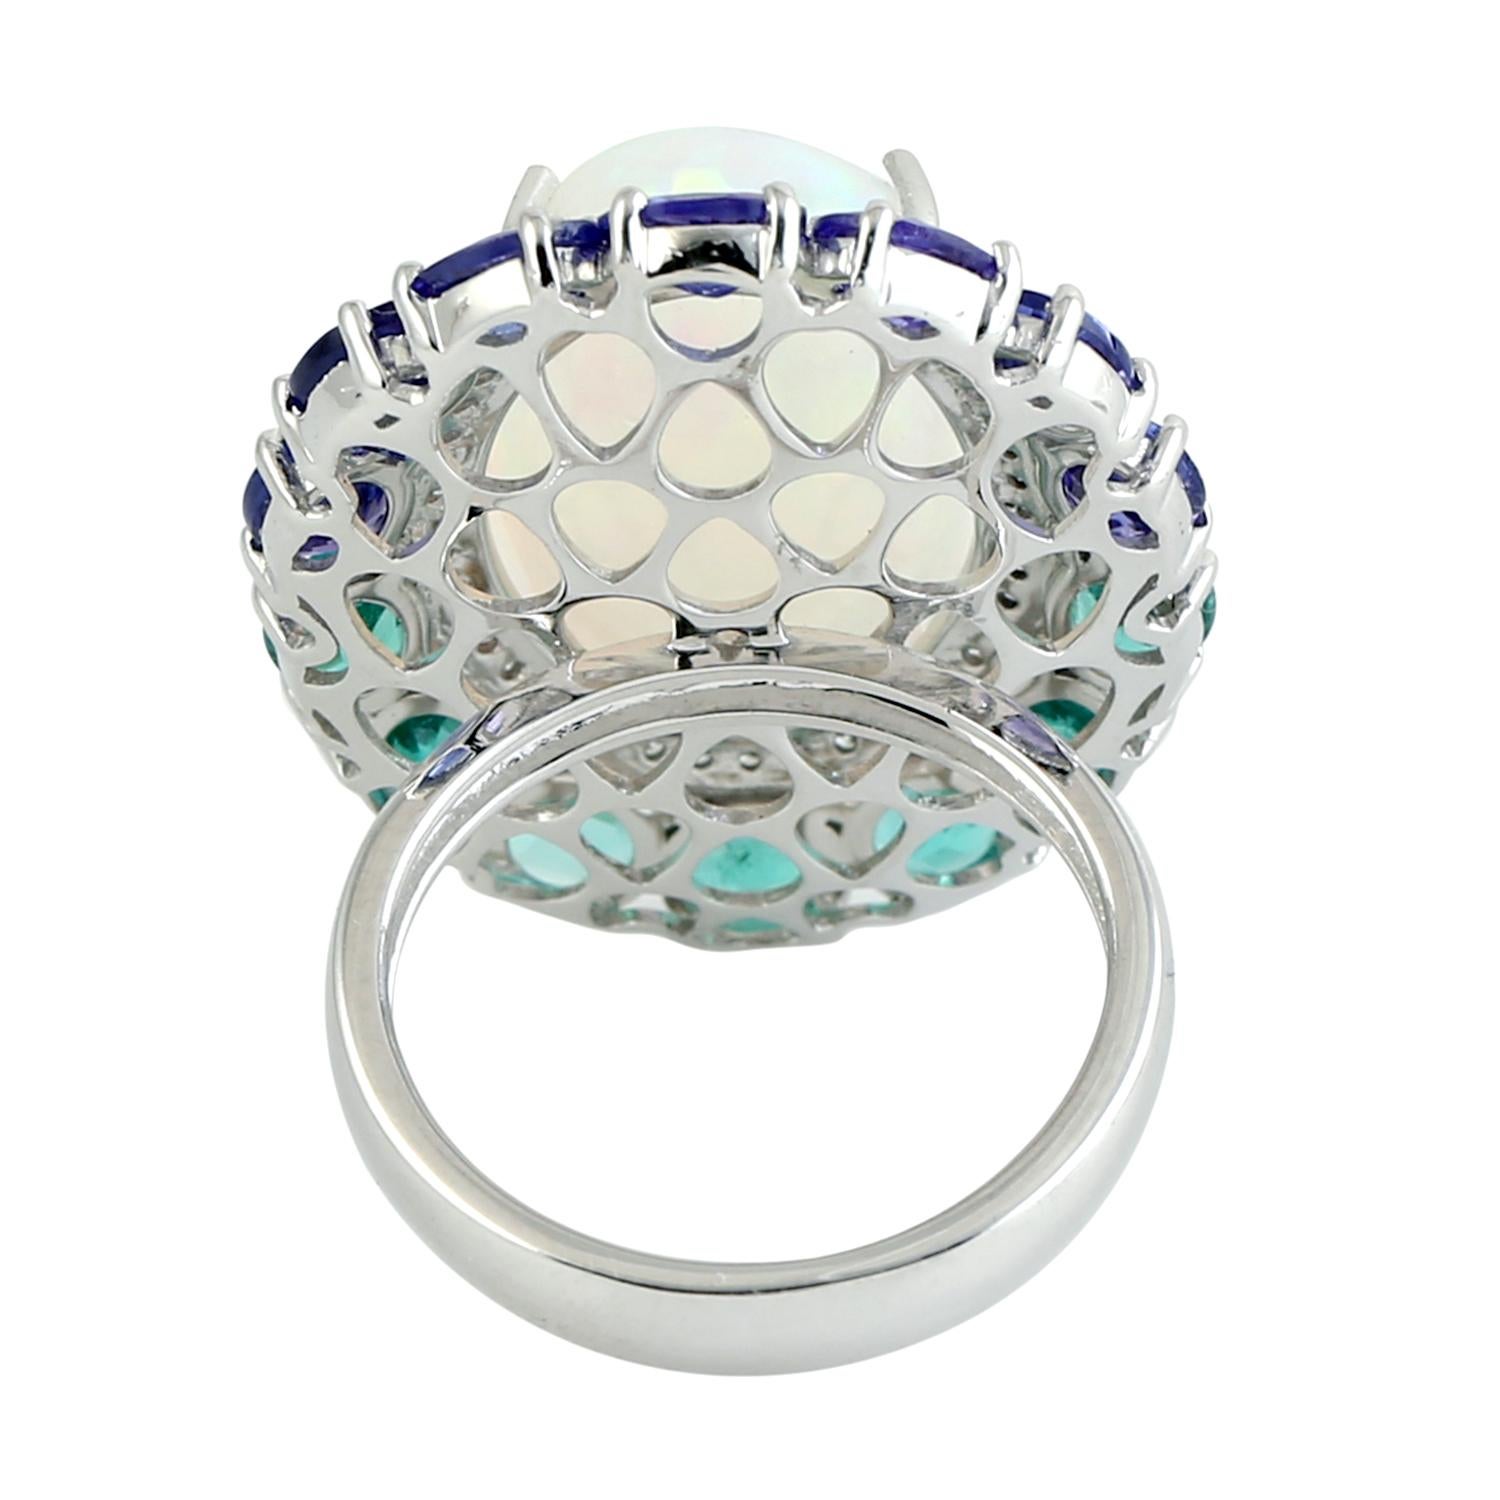 Mixed Cut Opal & Multi Gemstone Ring With Diamonds Made In 18k White Gold For Sale